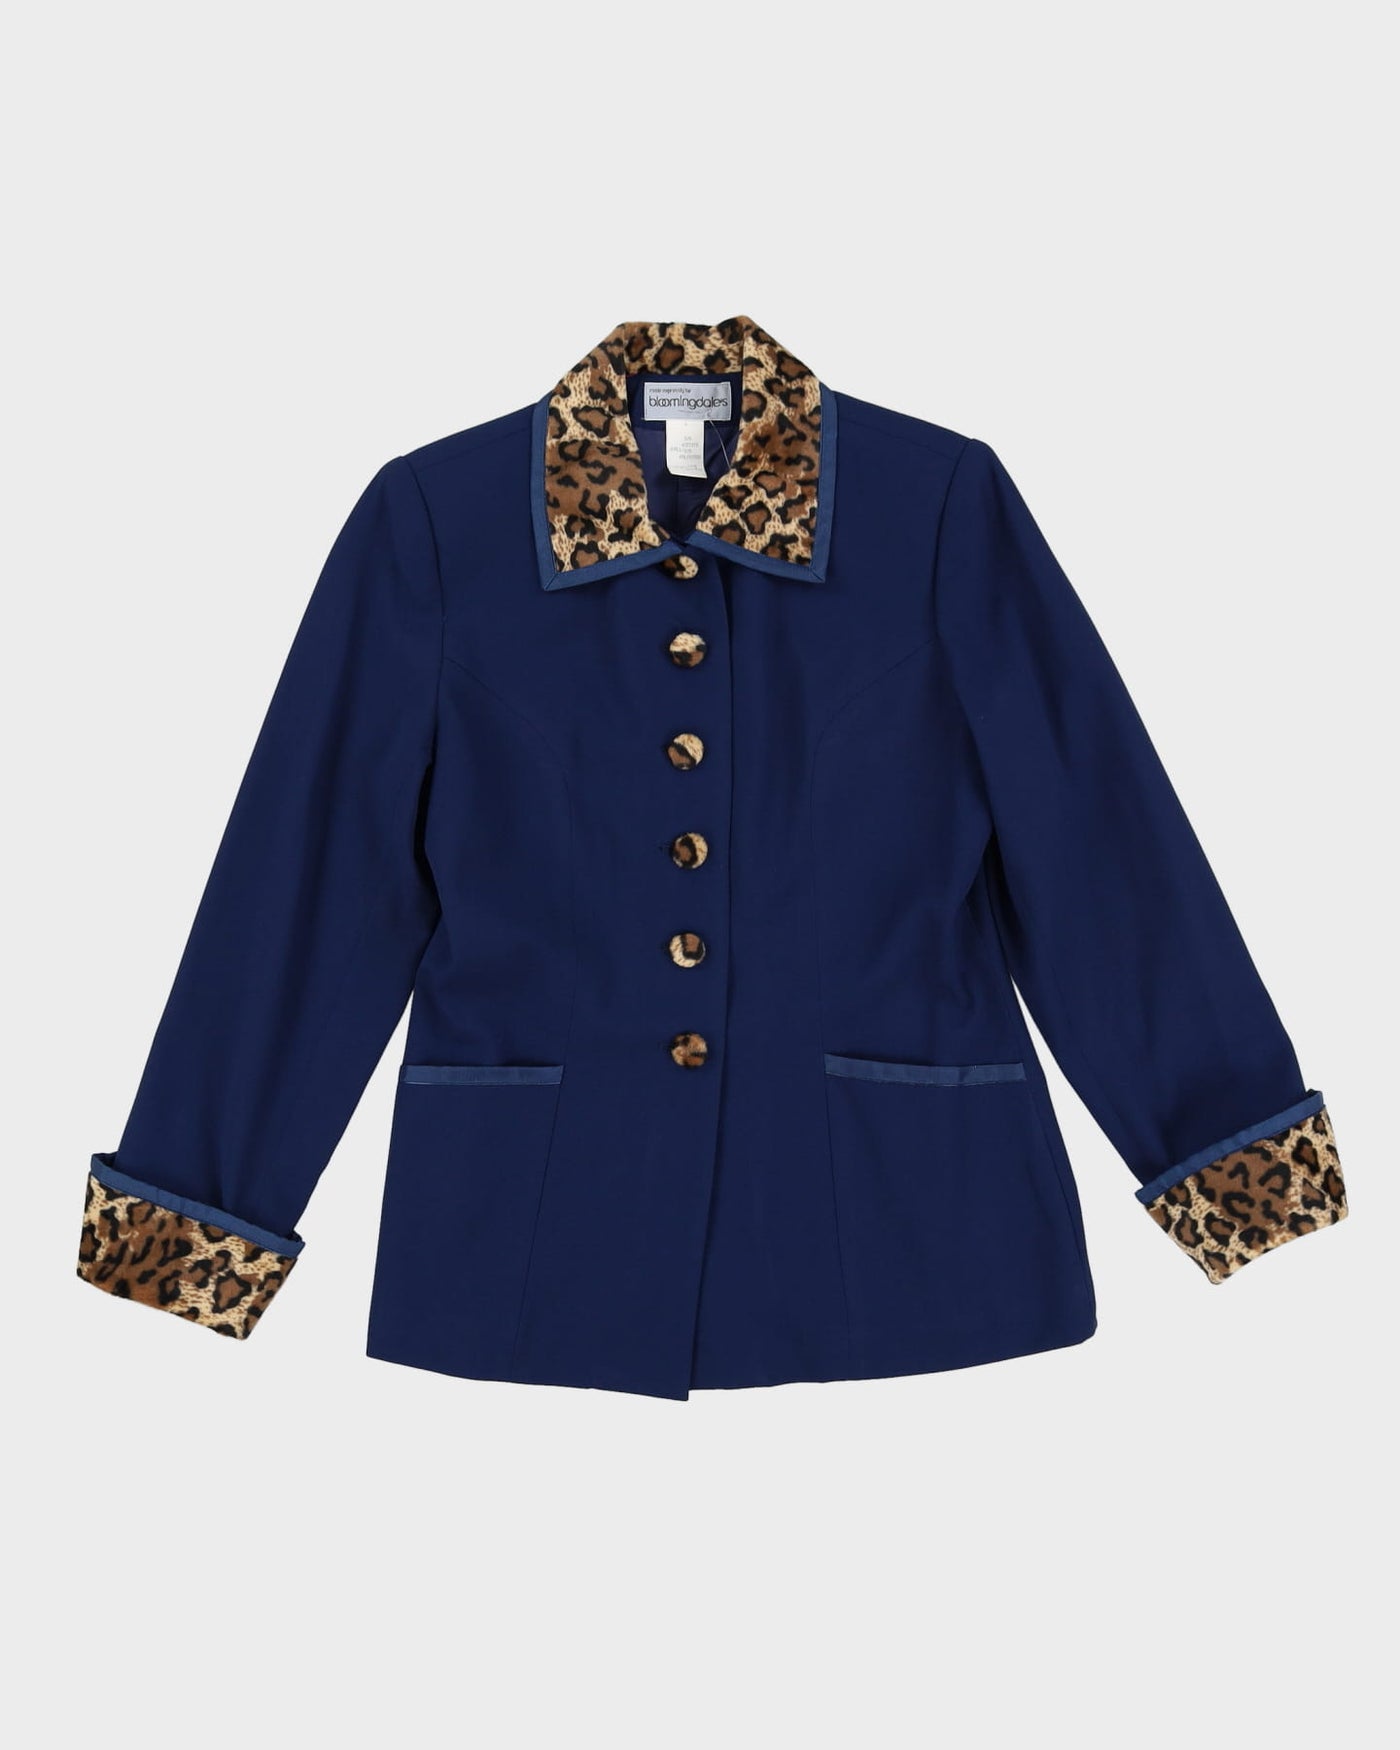 Bloomingdale's Blue With Leopard Print Collar Jacket - S